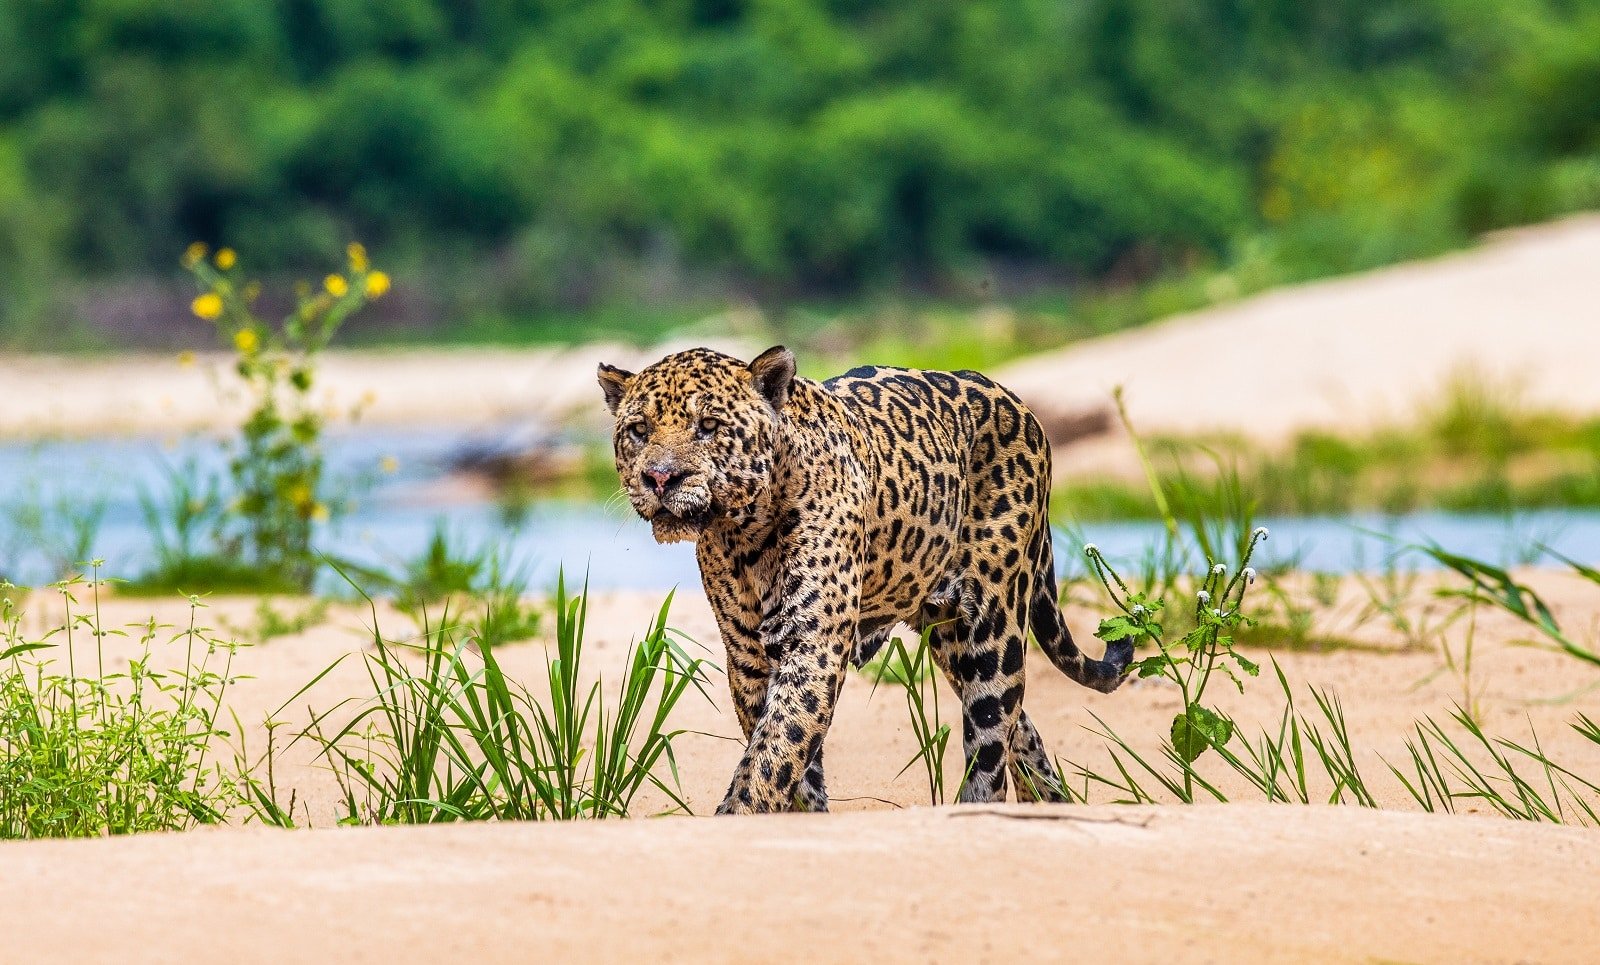 <p><span>The Pantanal, the world’s largest tropical wetland, offers one of the best opportunities to spot jaguars in the wild. This vast Brazilian ecosystem is home to a wide variety of wildlife, but the elusive jaguar is undoubtedly the star attraction.</span></p> <p><span>Spotting these magnificent cats requires patience and respect for their natural habitat. Boat tours along the rivers of the Pantanal provide the best chances for jaguar sightings, allowing you to observe these animals without intruding into their territory.</span></p> <p><b>Insider’s Tip: </b><span>Opt for boat-based tours for a less intrusive way to observe jaguars.</span></p> <p><b>When To Travel: </b><span>The dry season from July to October is the best time for jaguar spotting.</span></p> <p><b>How To Get There: </b><span>Fly into Cuiabá or Campo Grande and join a guided tour to the Pantanal.</span></p>